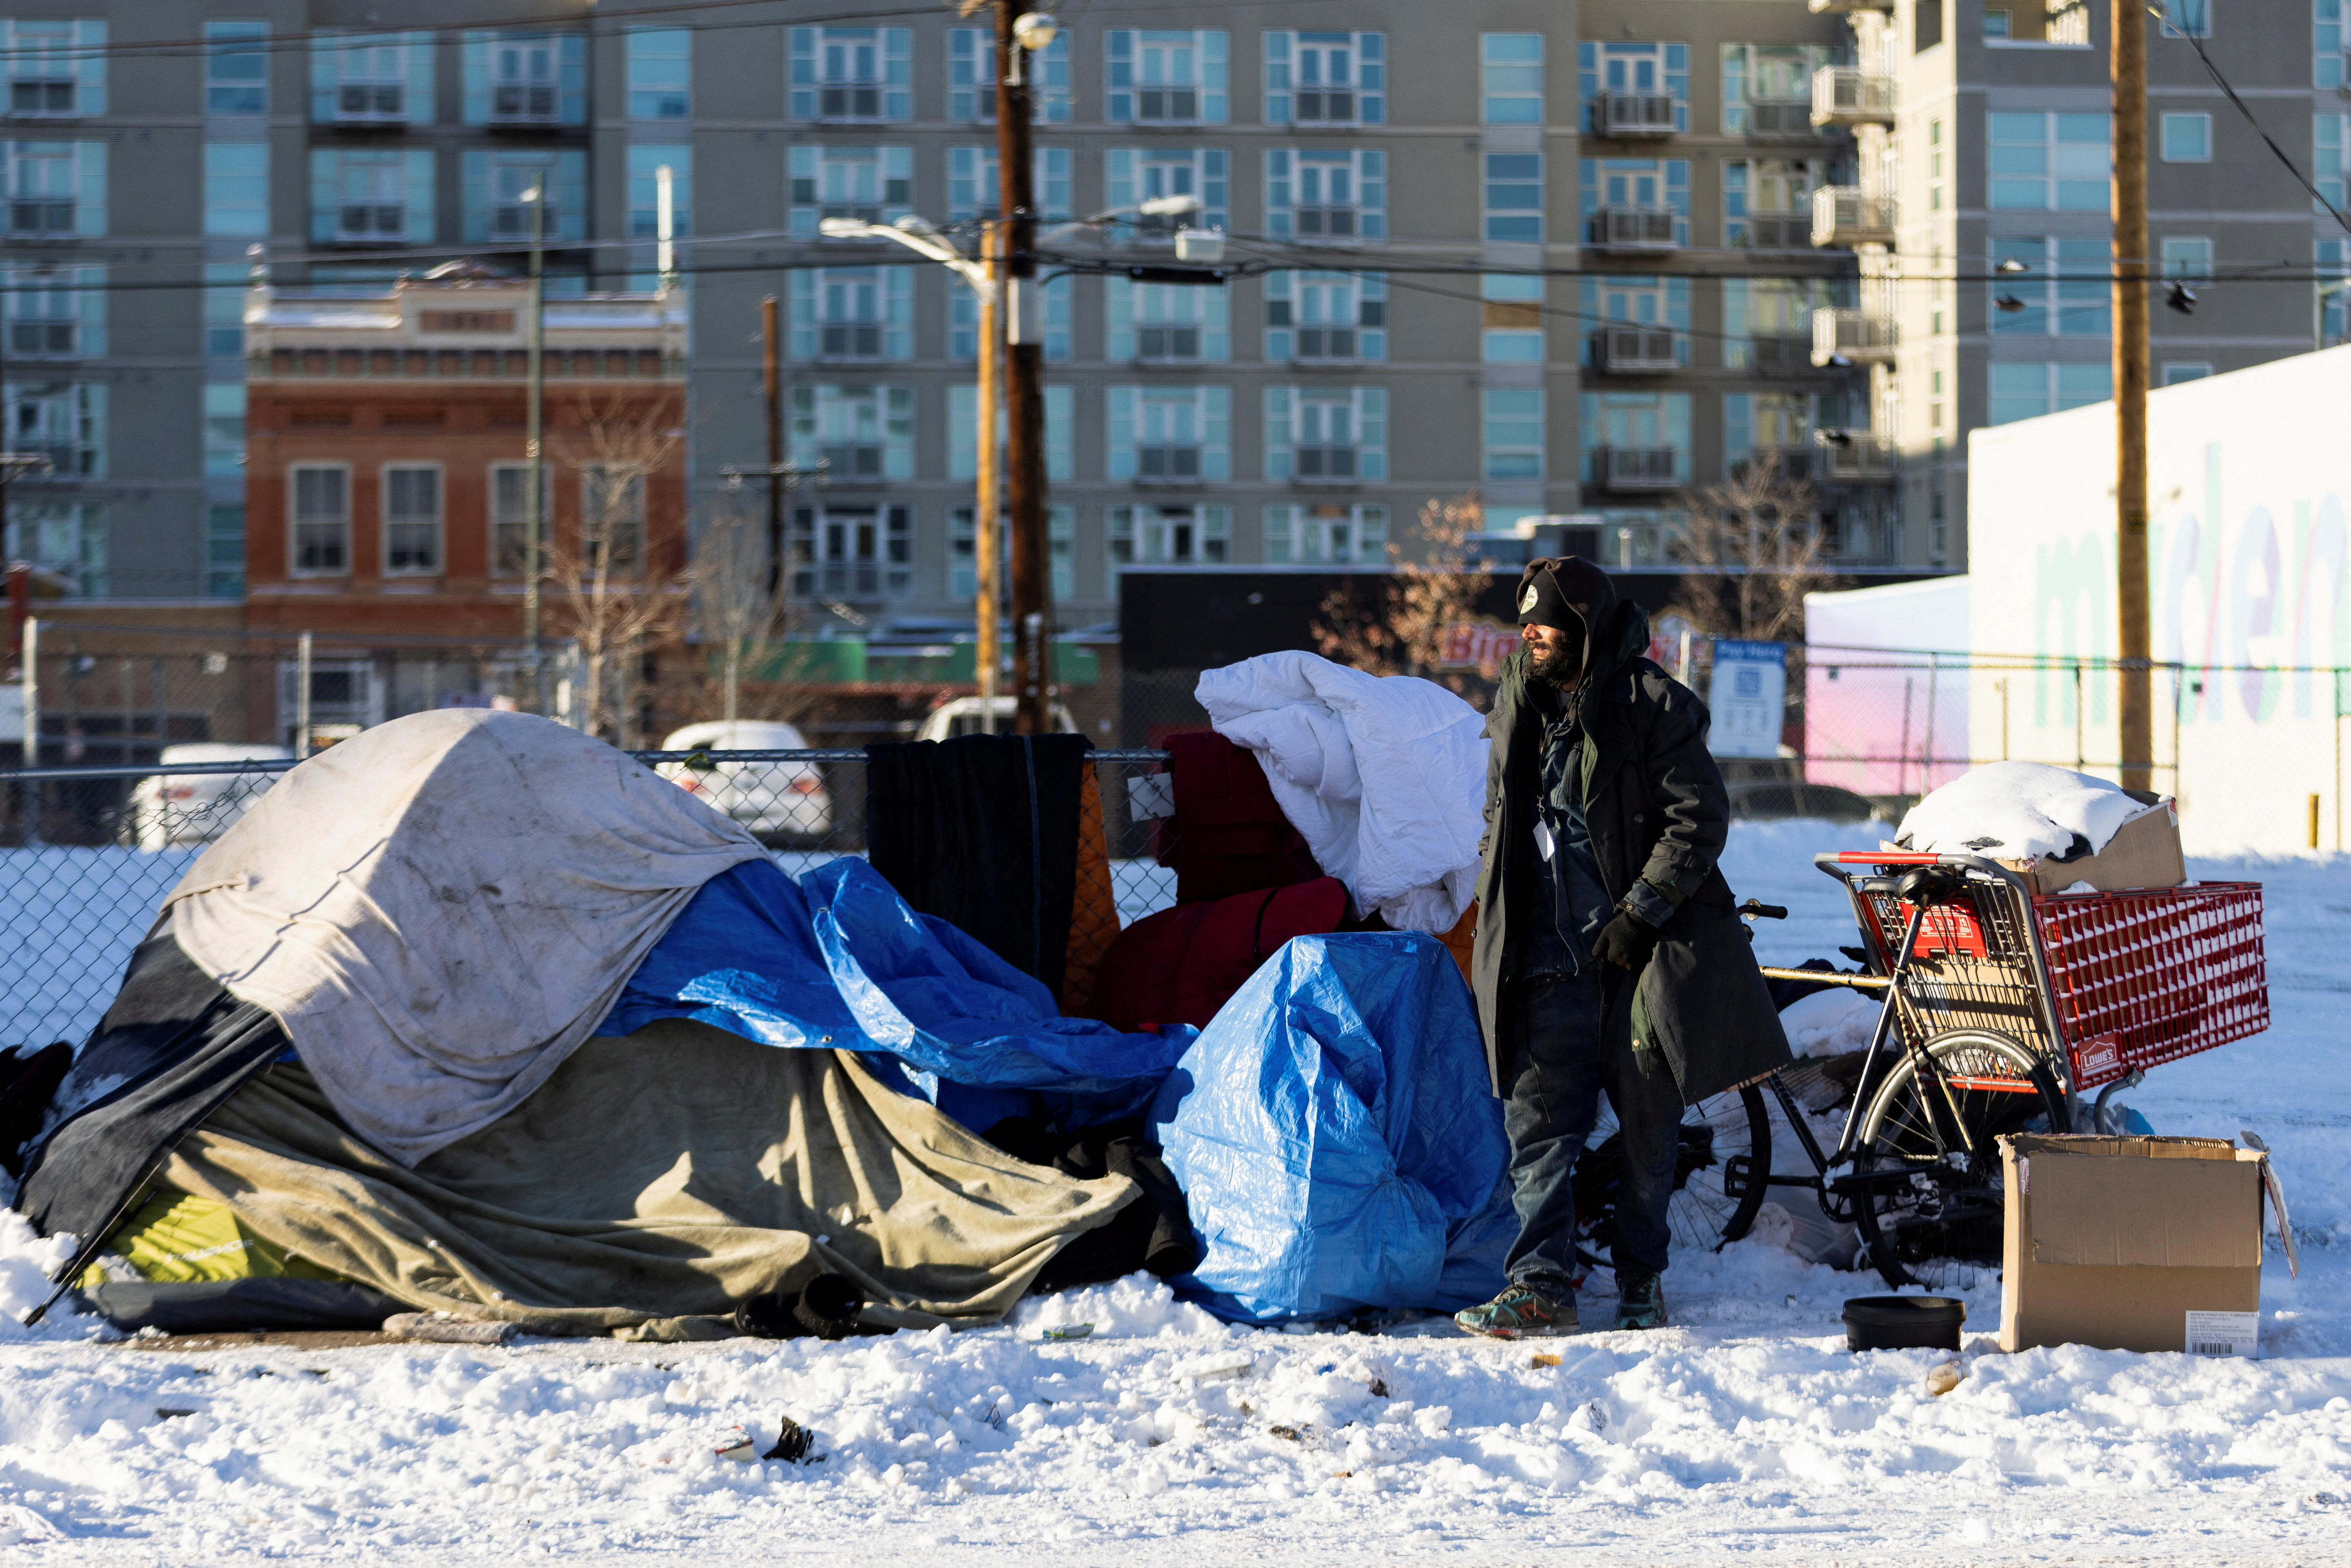 Extreme cold weather stretches U.S. homeless shelters' capacity